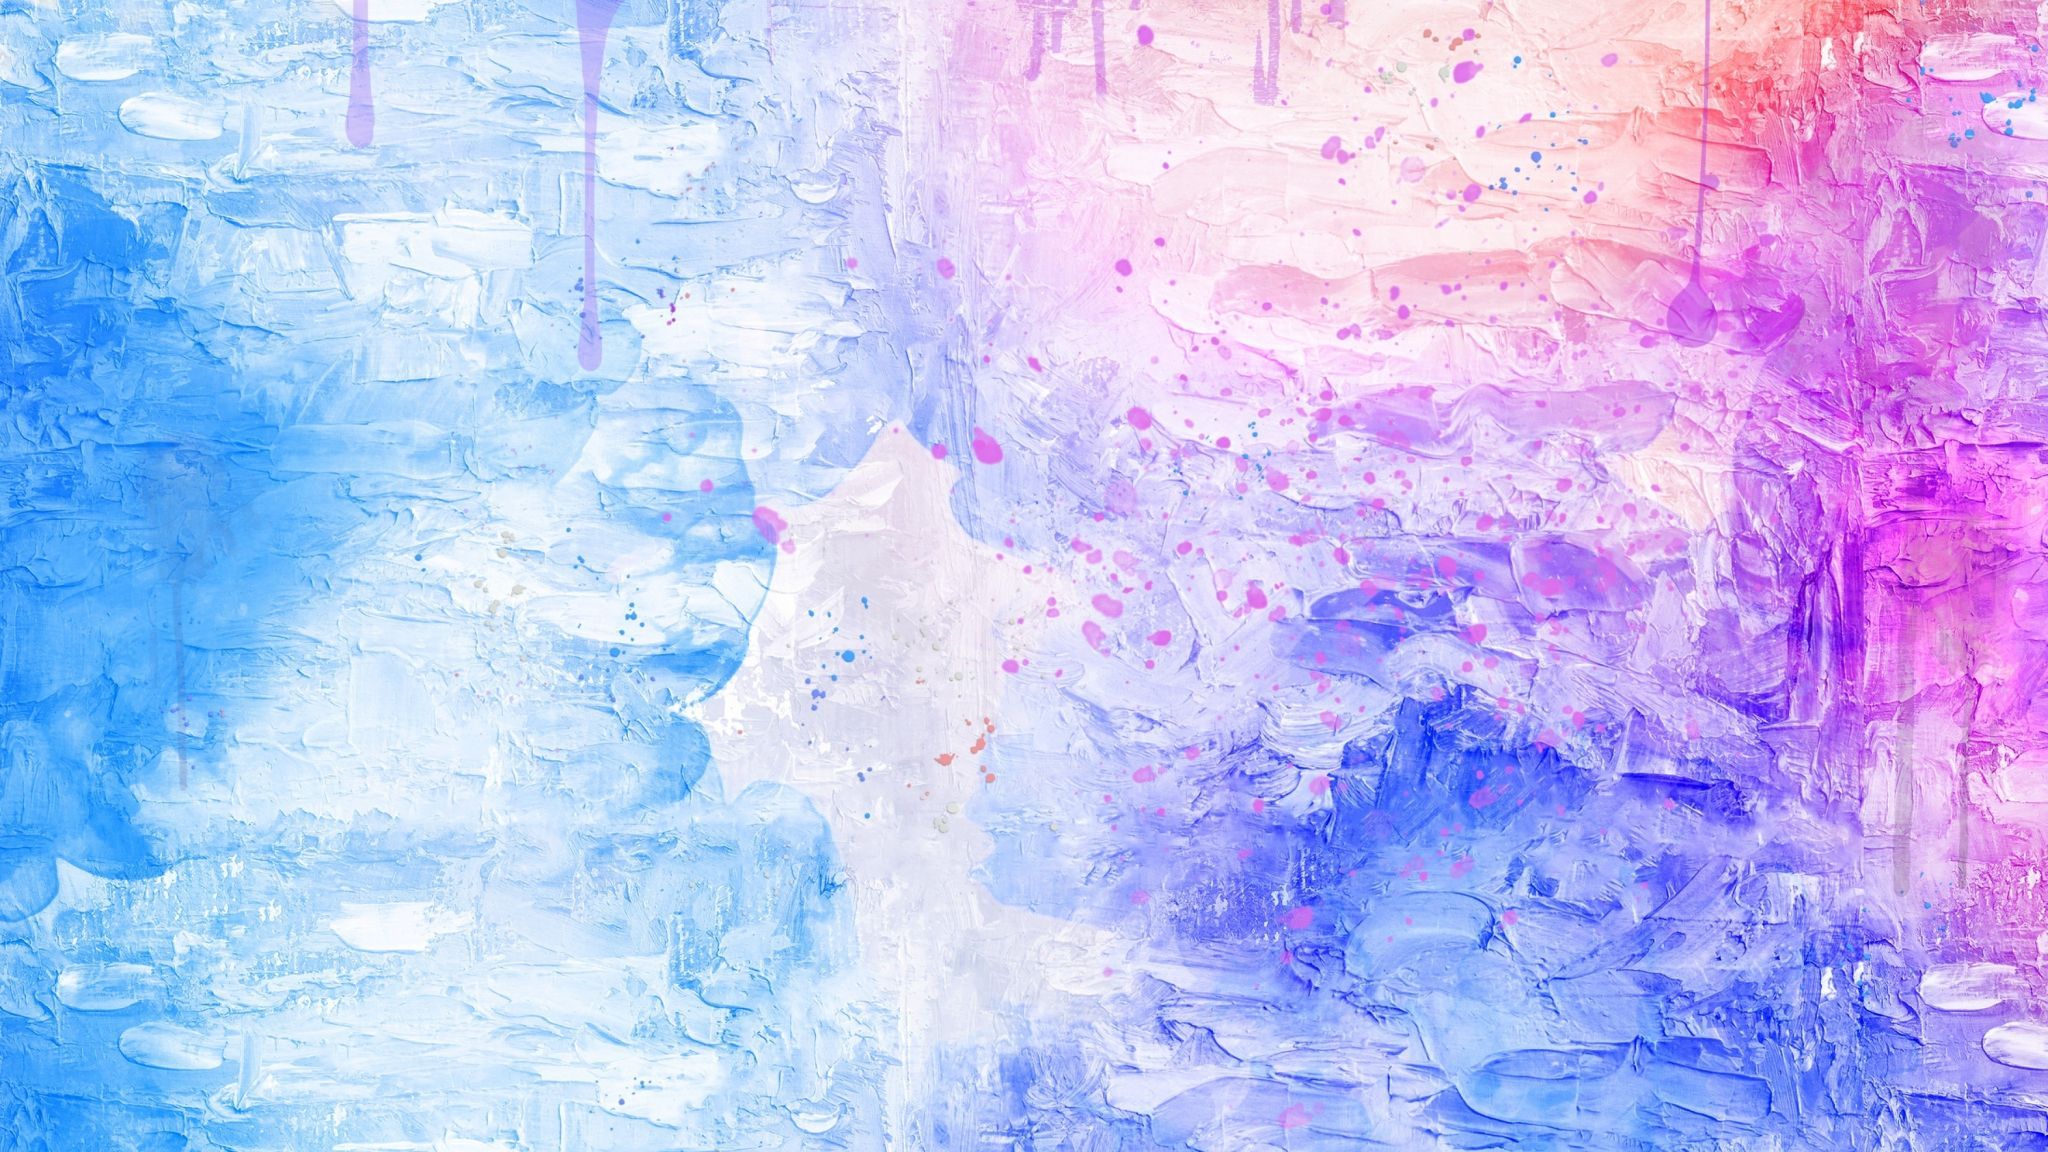 Download wallpaper 2048x1152 blue, pink, water colors, art, canvas surface, dual wide 2048x1152 HD background, 10387